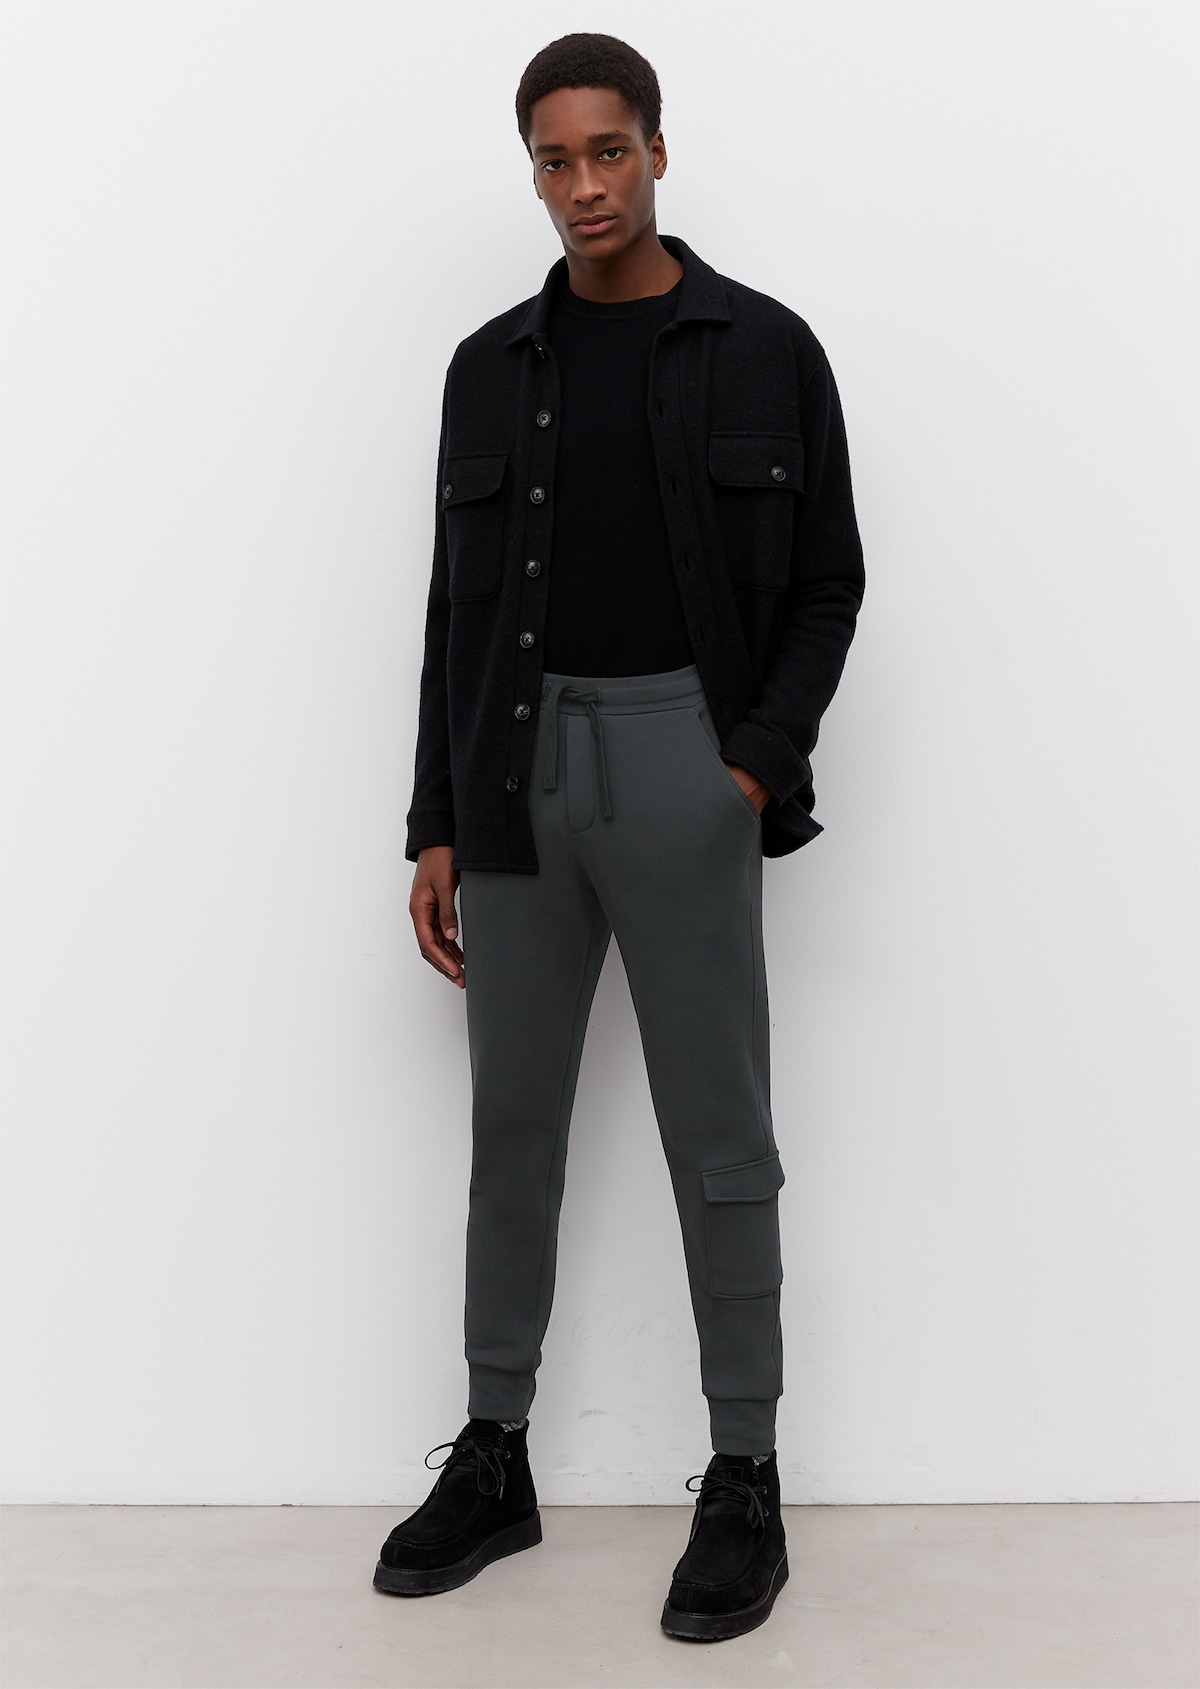 ARCHIVE CODE tracksuit bottoms No. 23 made of organic cotton fabric ...